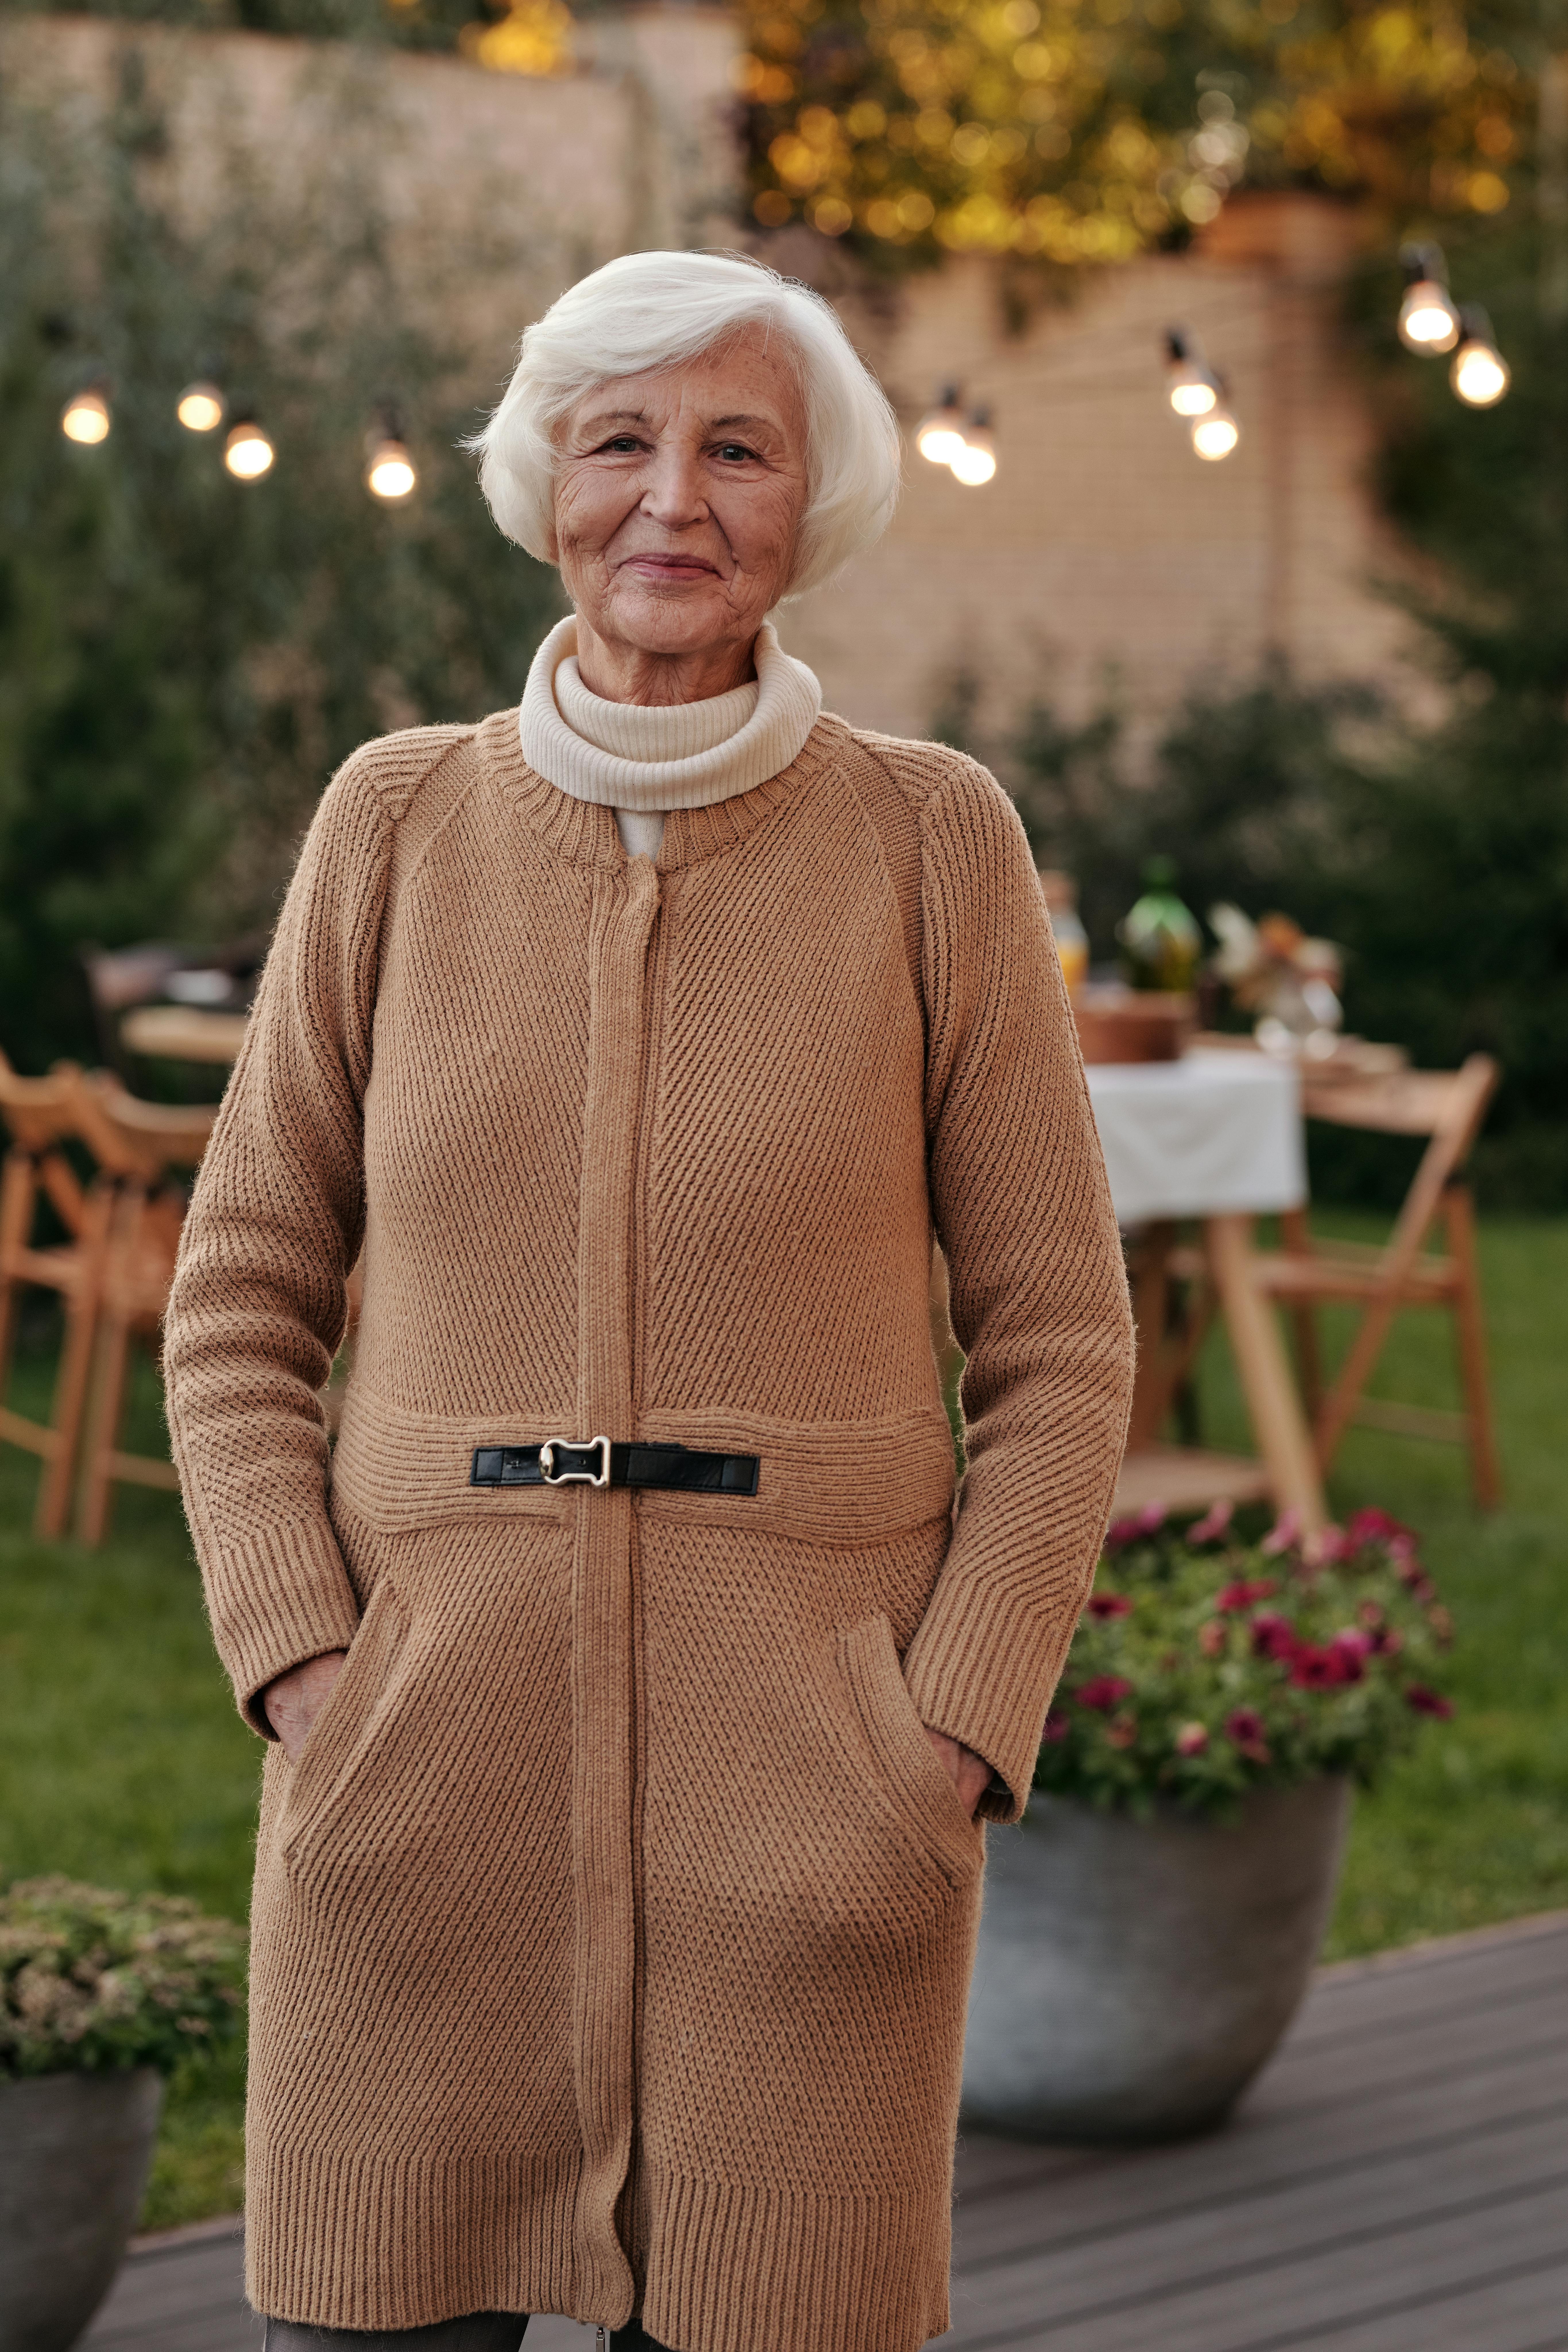 A happy and proud older woman posing for a photo outside | Source: Pexels